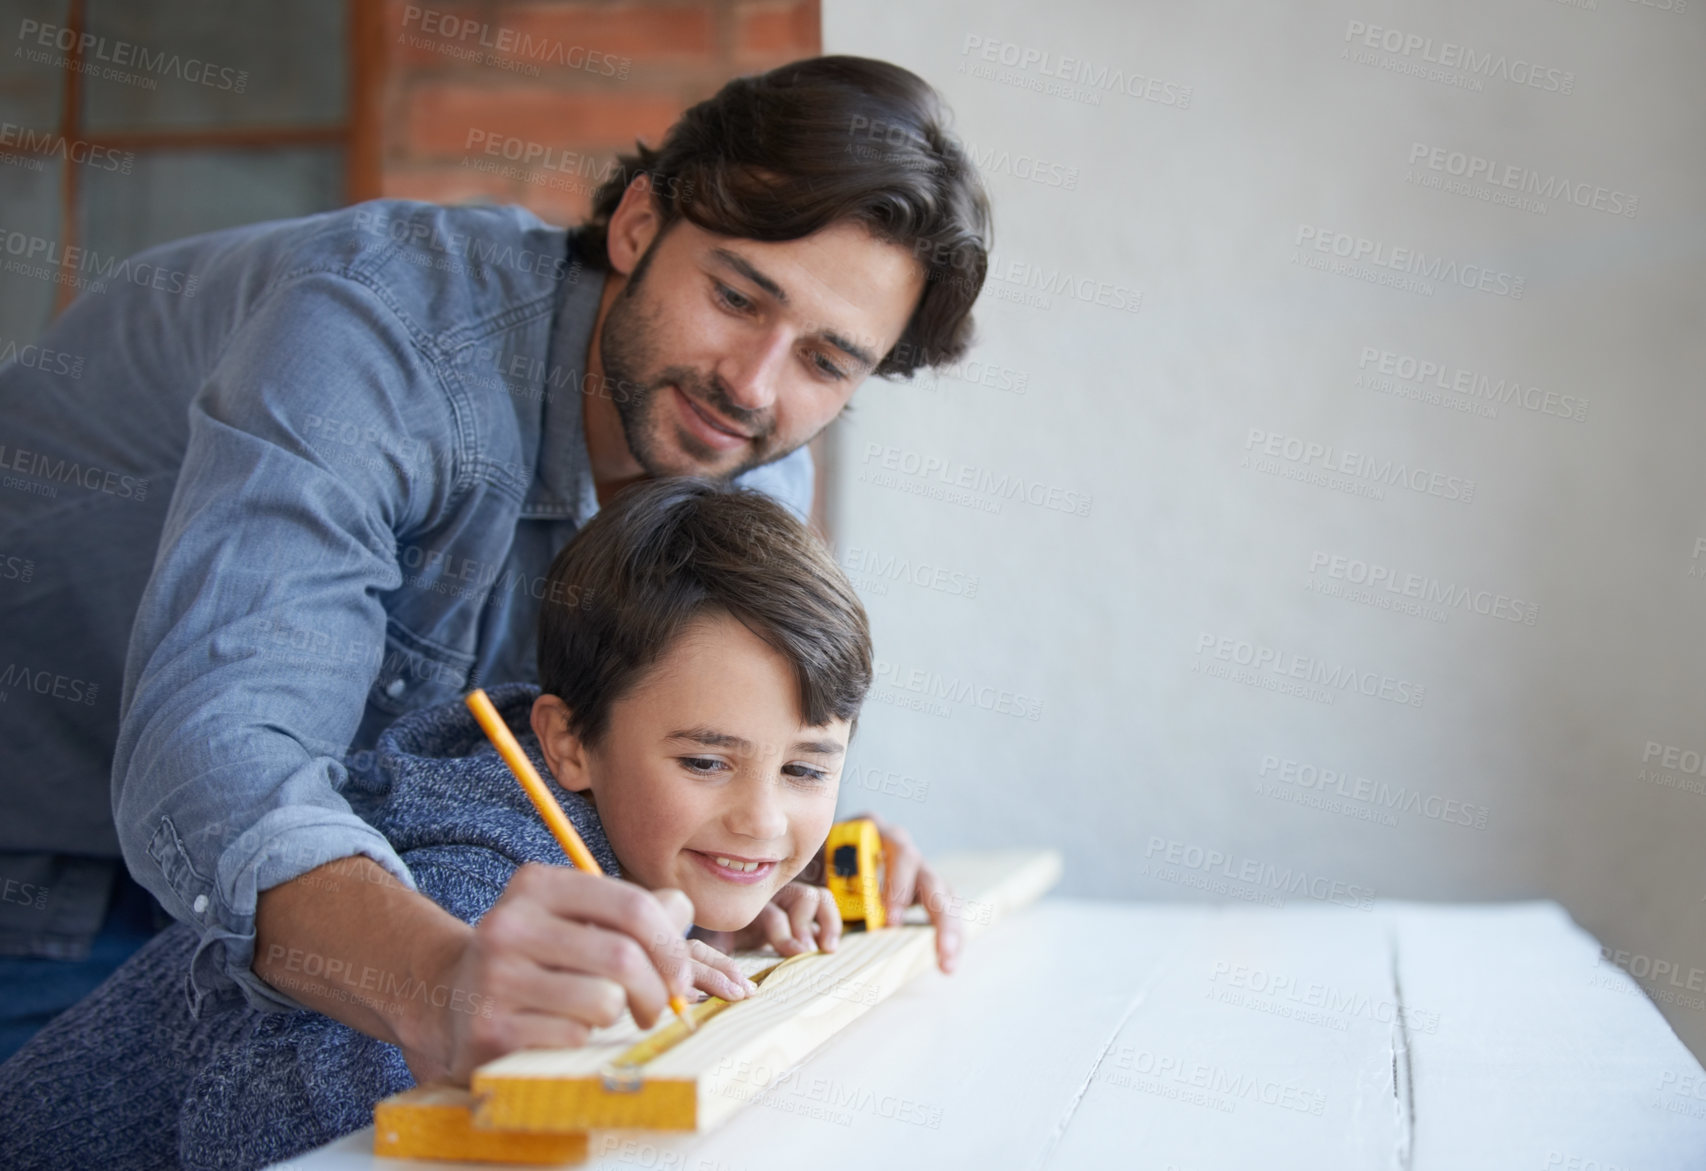 Buy stock photo A father and son doing woodwork together